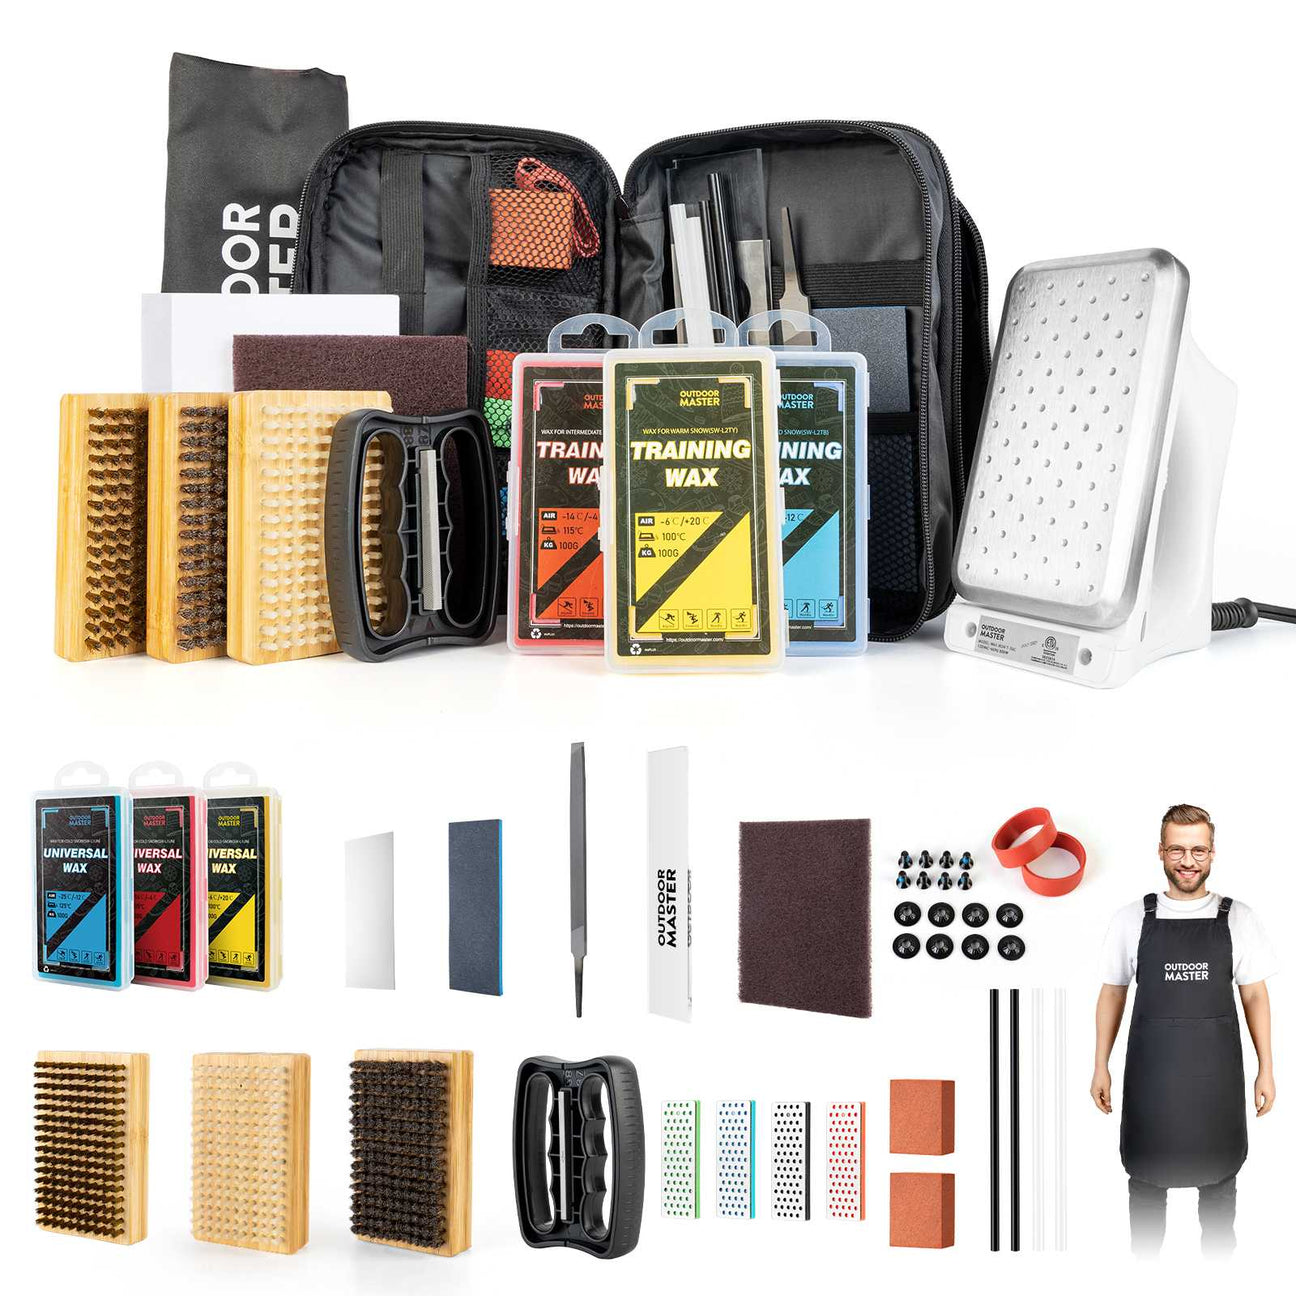 3. The OutdoorMaster Snowboard Waxing Kit [Upgrade]